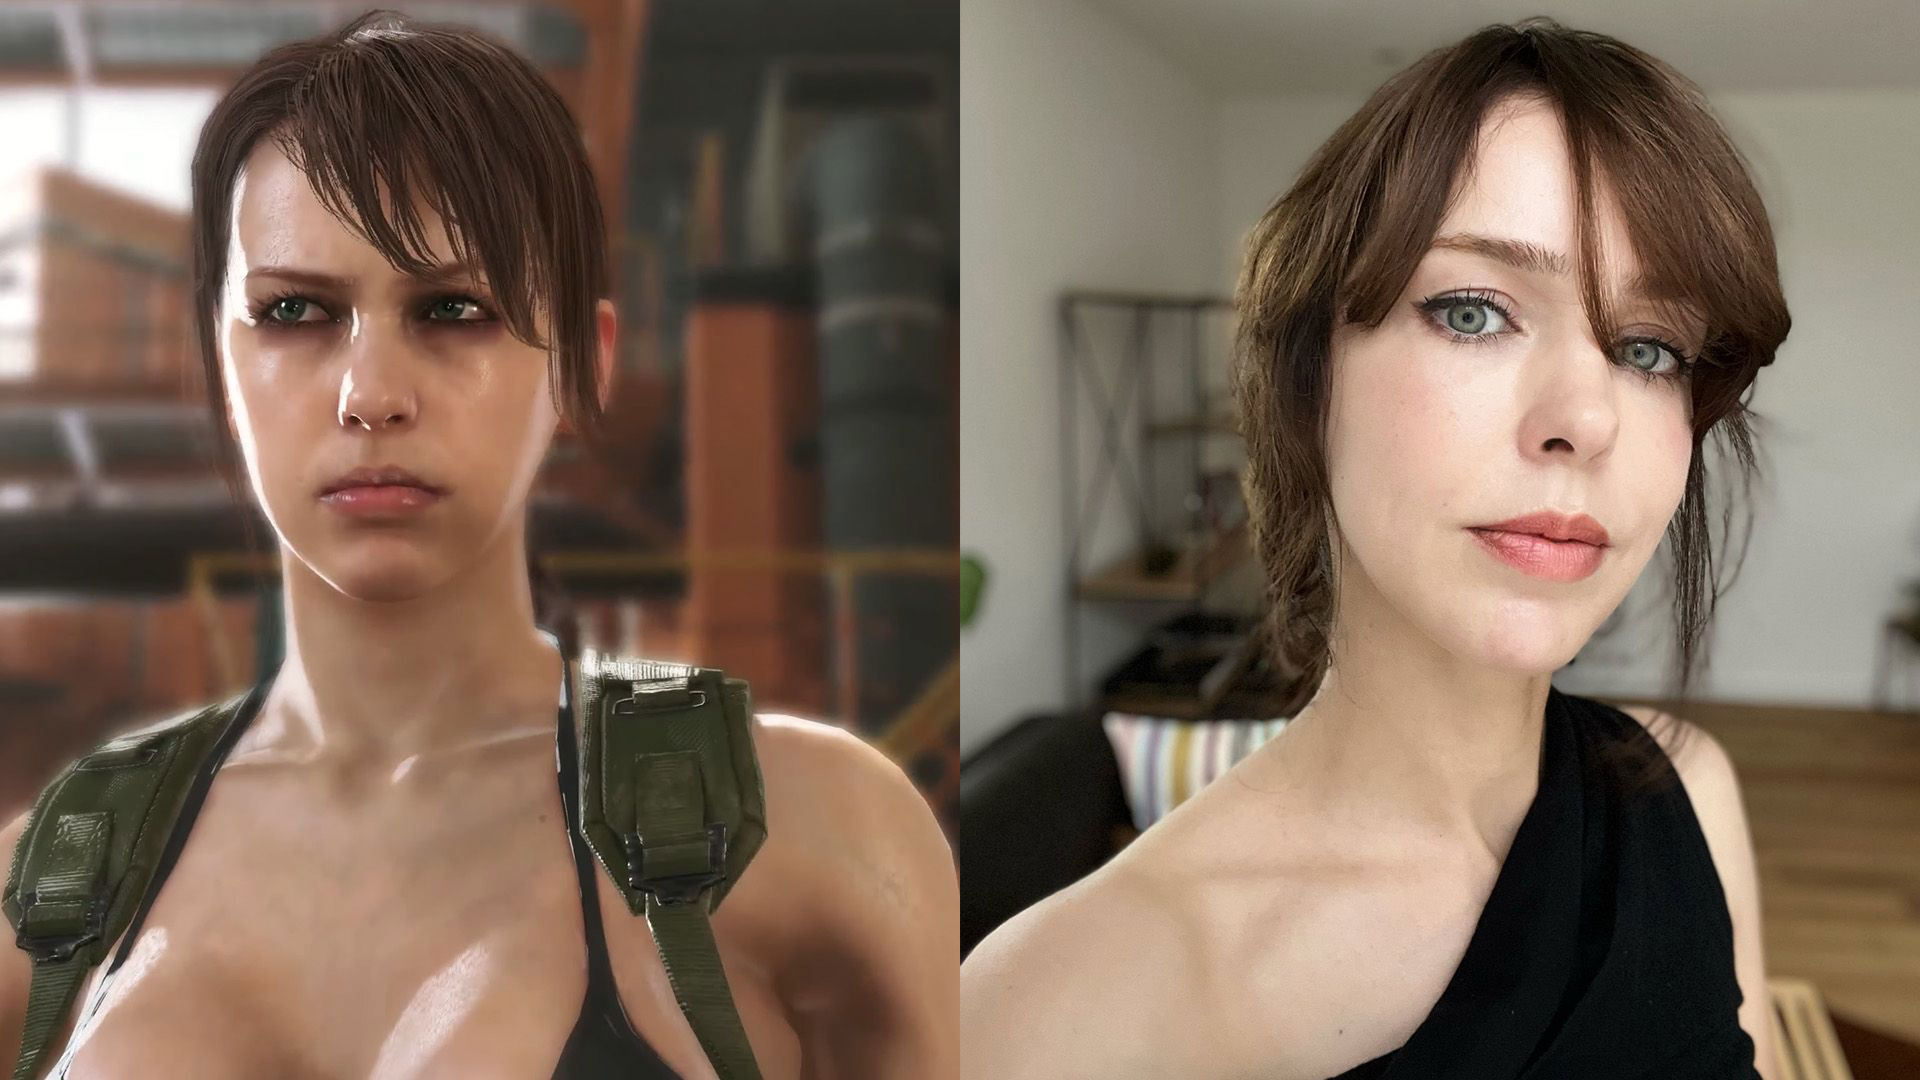 Metal Gear Solid 5 S Quiet Actress Reflects On Very Revealing Costume I Understand The